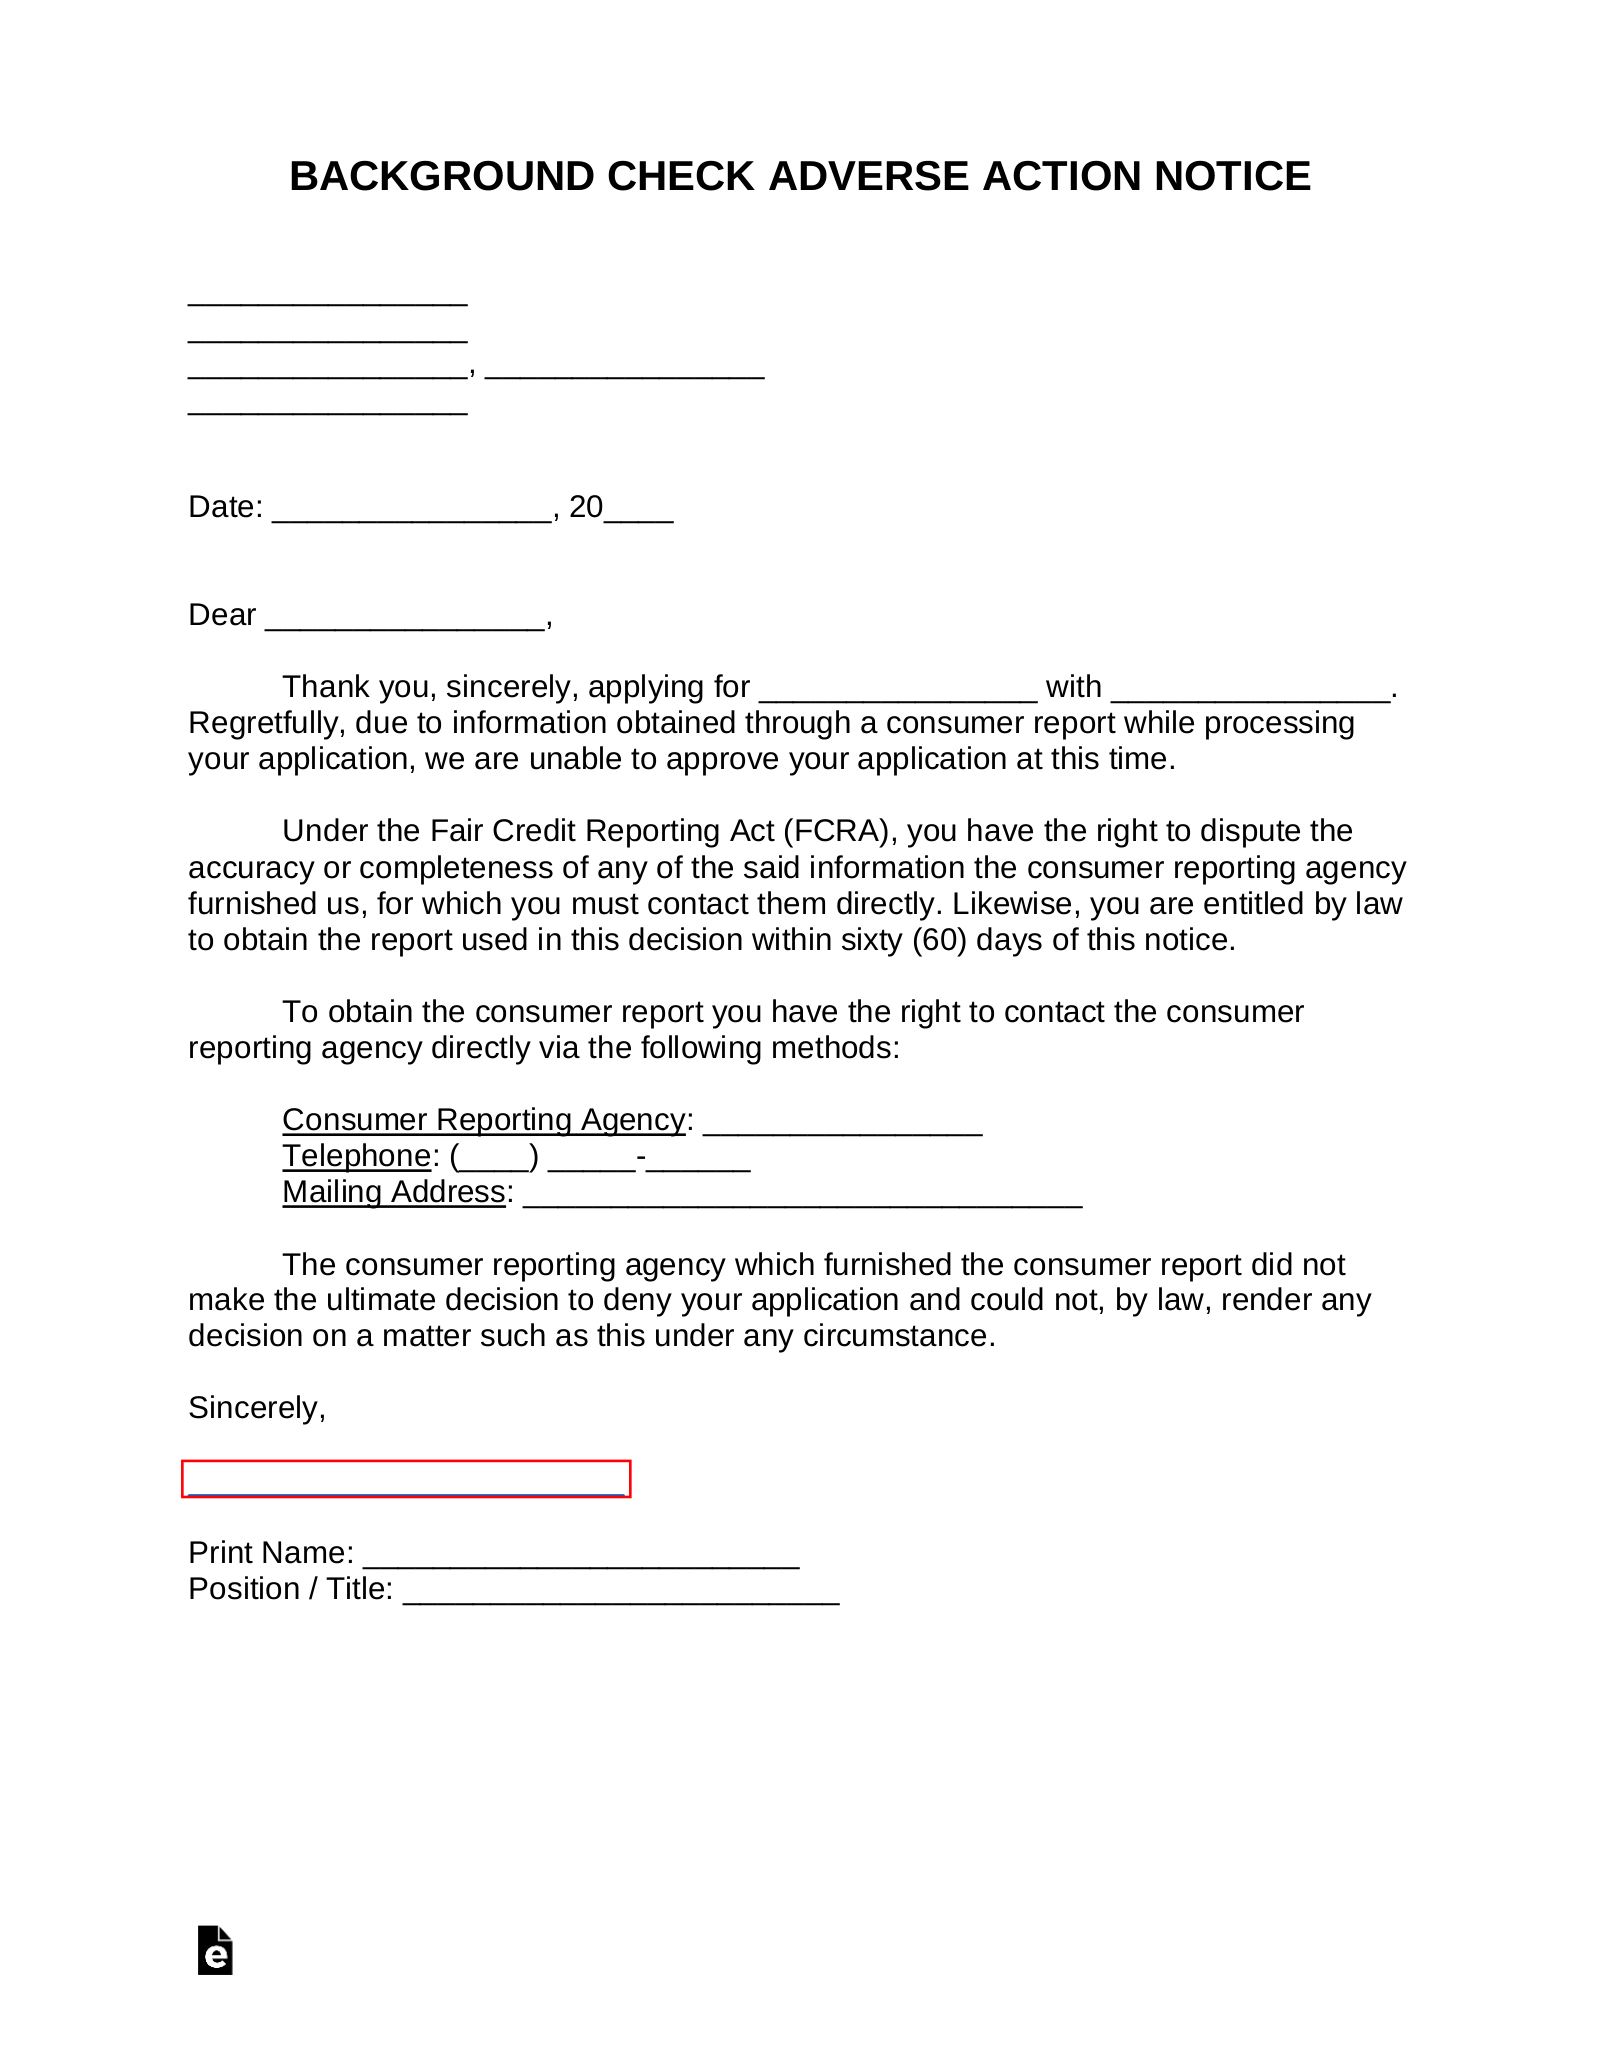 Free Background Check Adverse Action Notice - PDF | Word – eForms